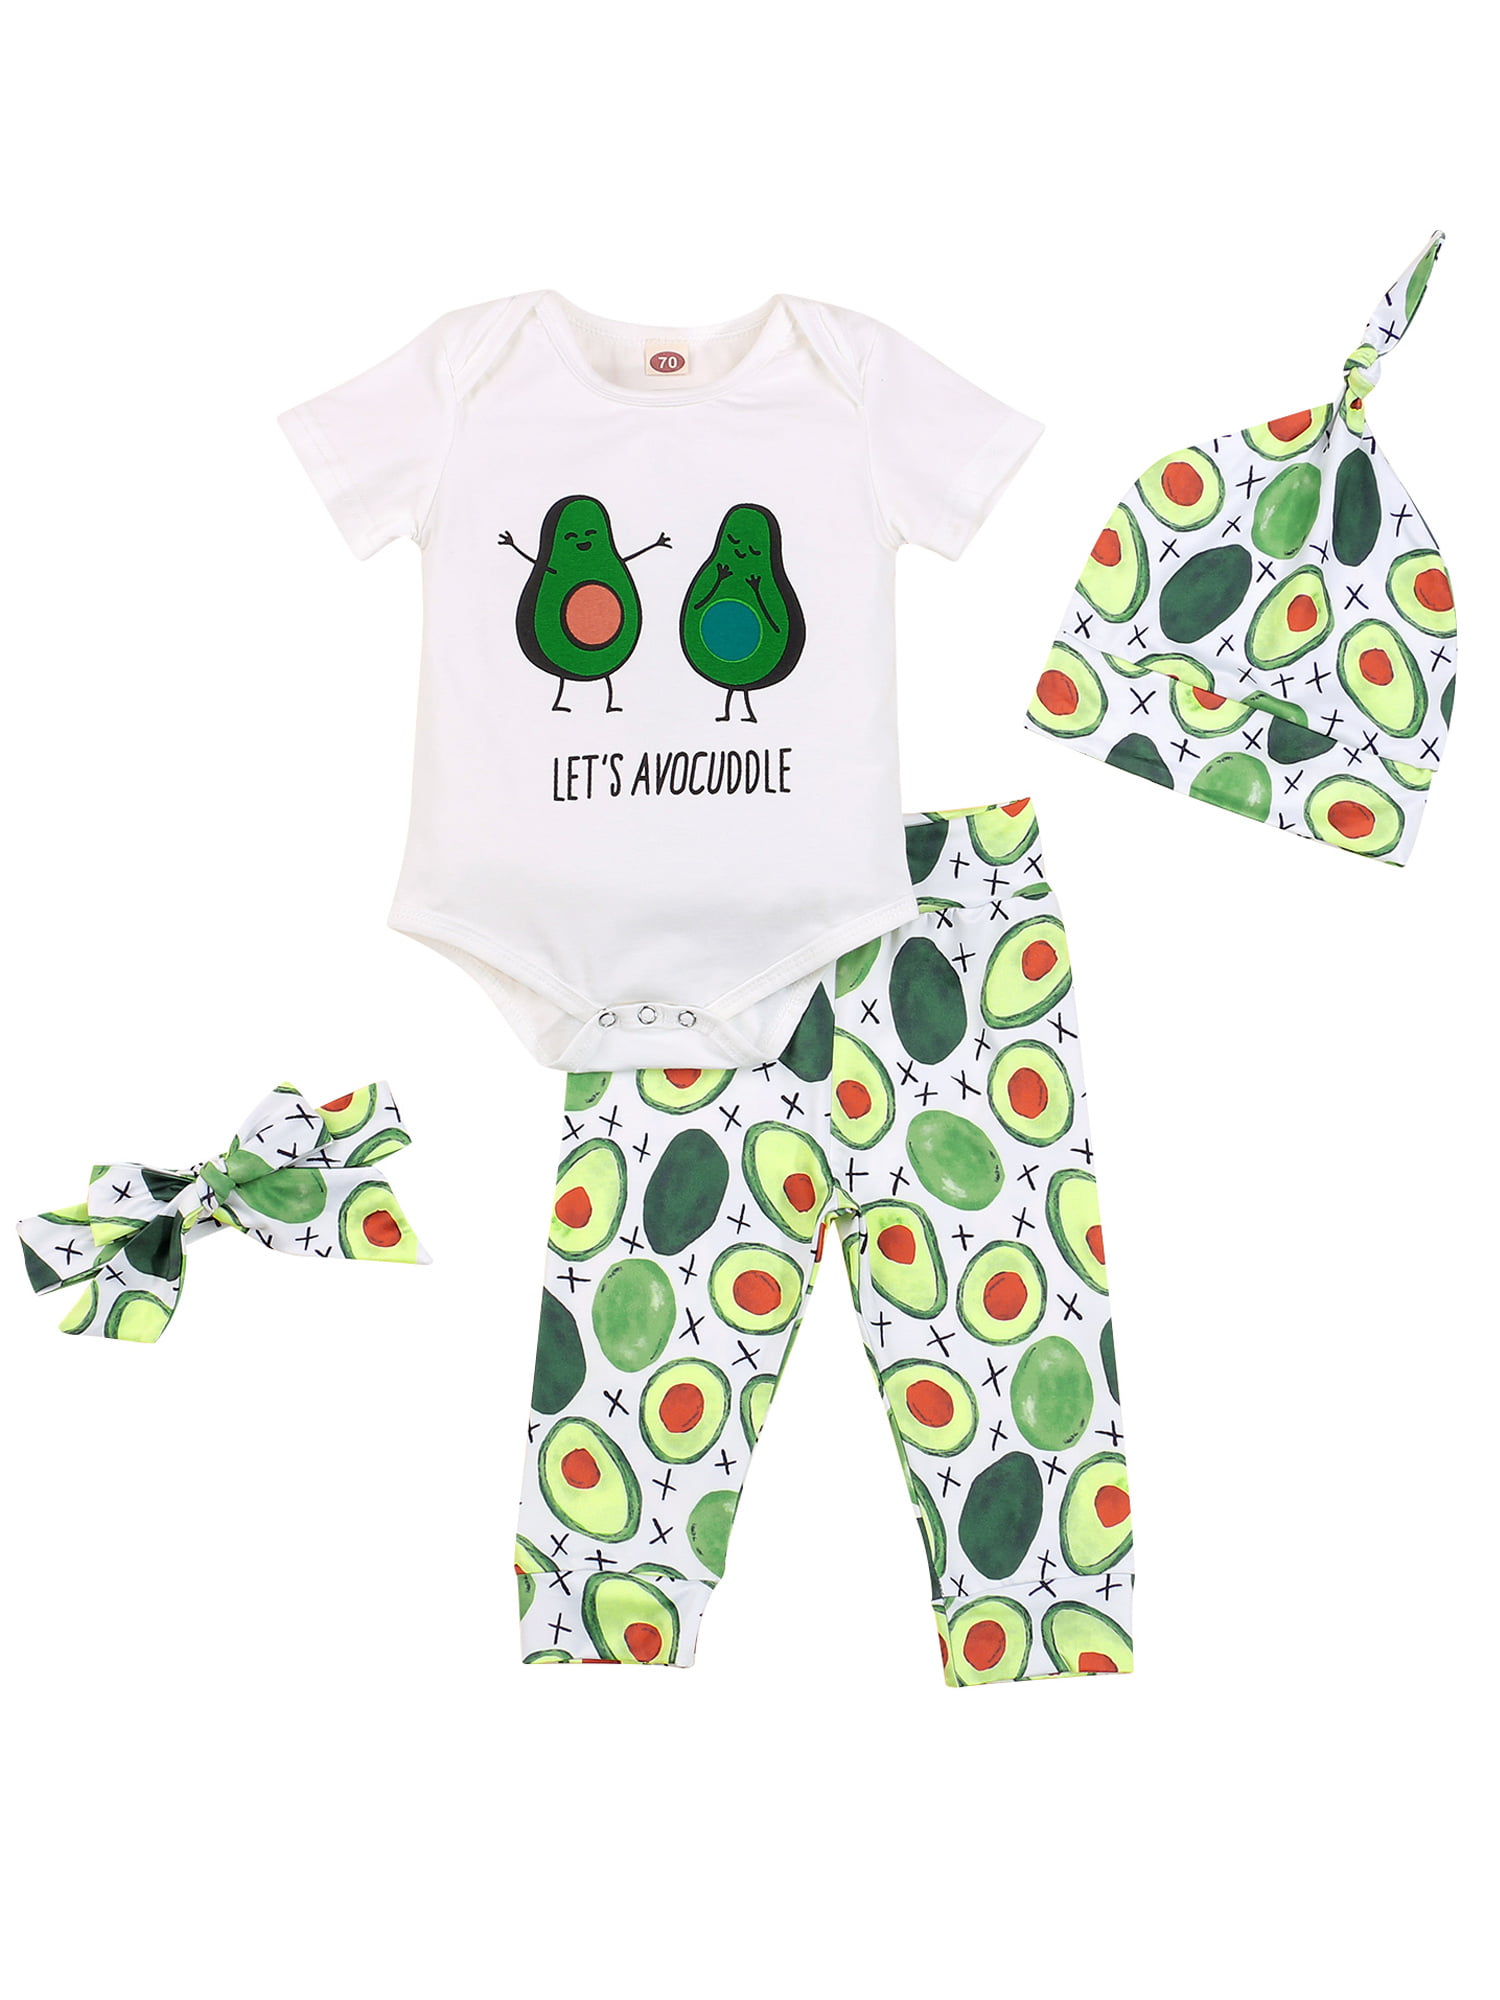 Succulent Baby Romper with Matching HatHeadband